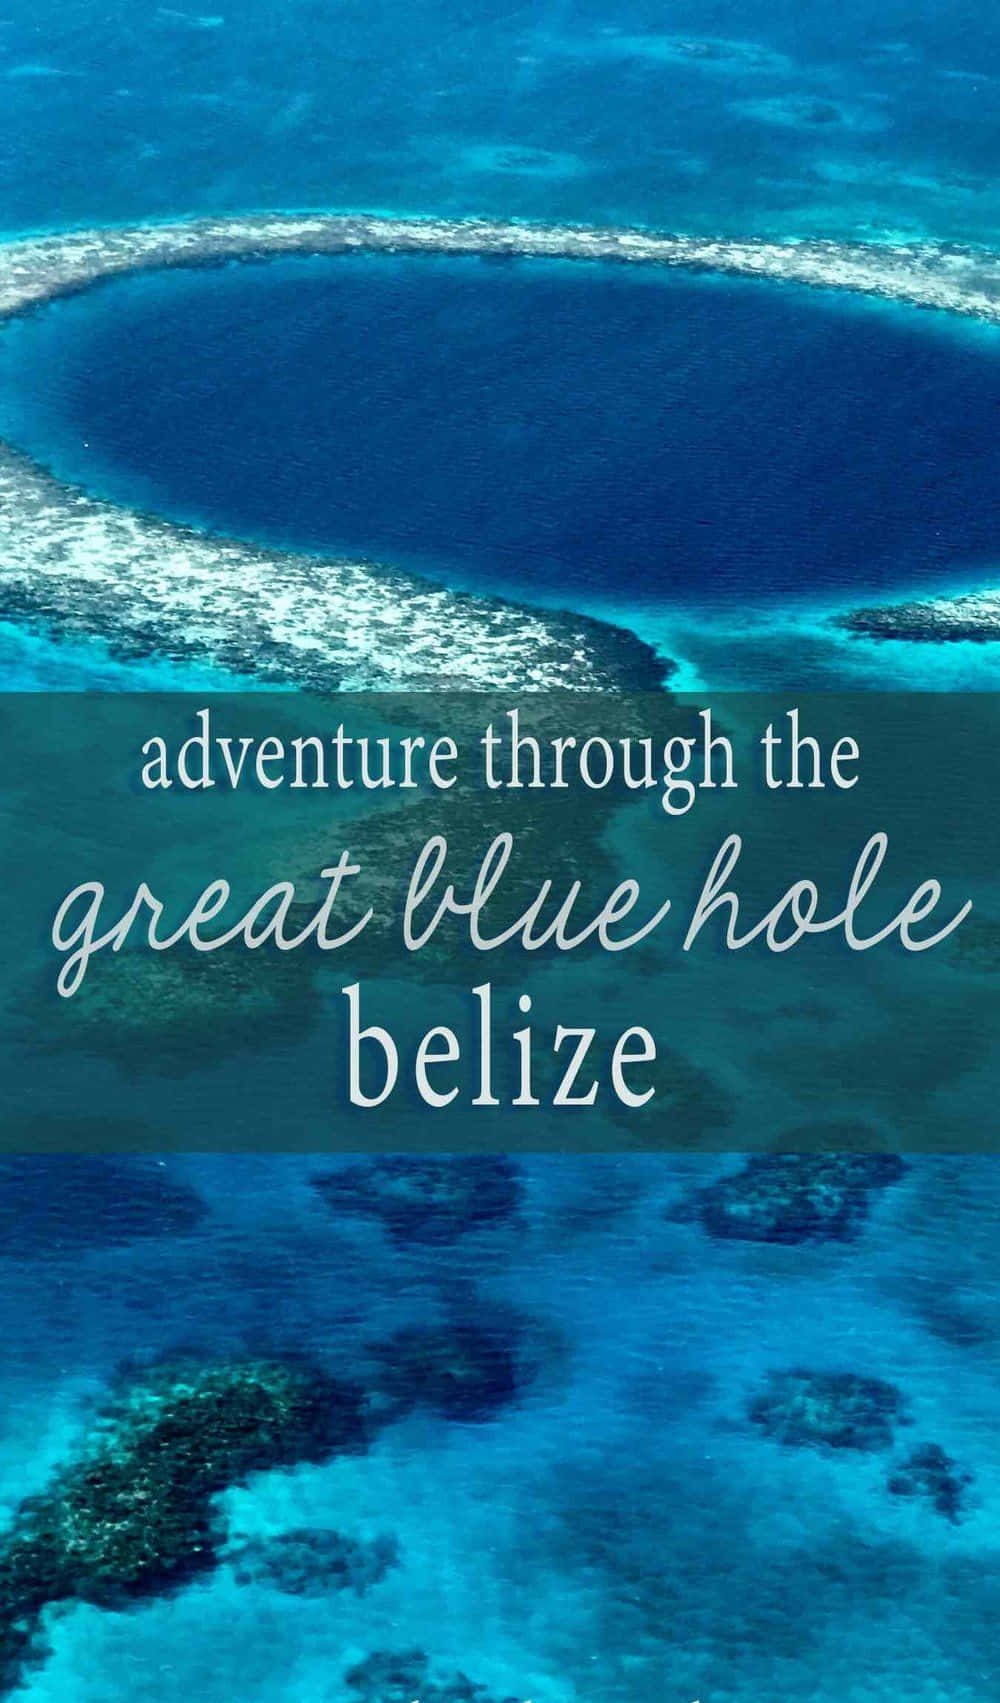 "The Majestic Blue Hole" Wallpaper